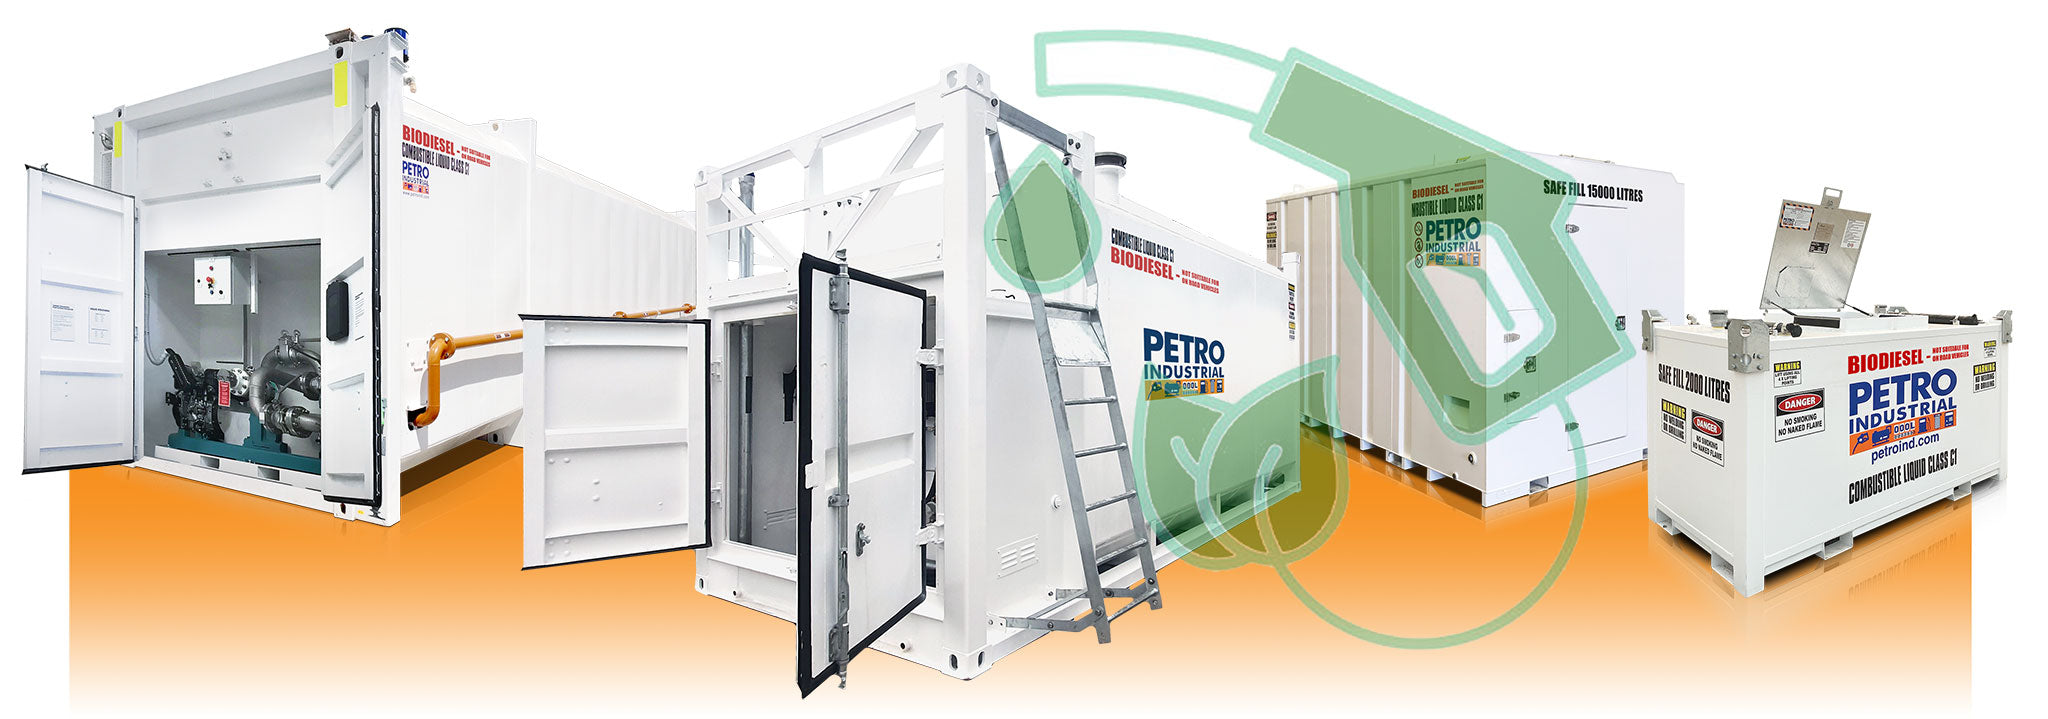 Biodiesel Storage and Dispensing by PETRO Industrial